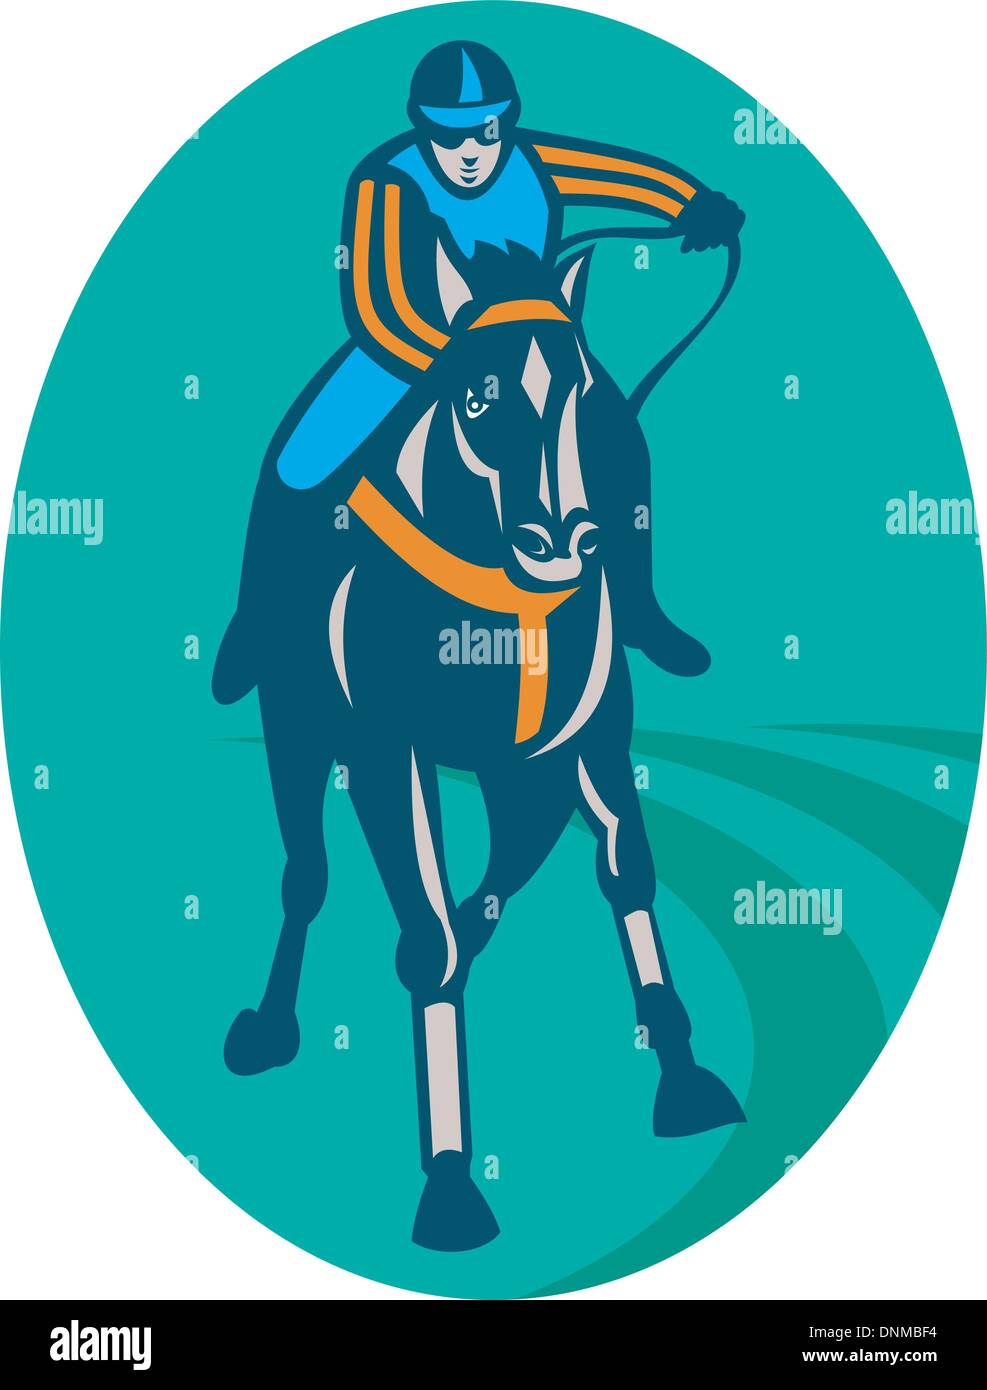 illustration of a Horse and jockey racing  race track front view Stock Vector